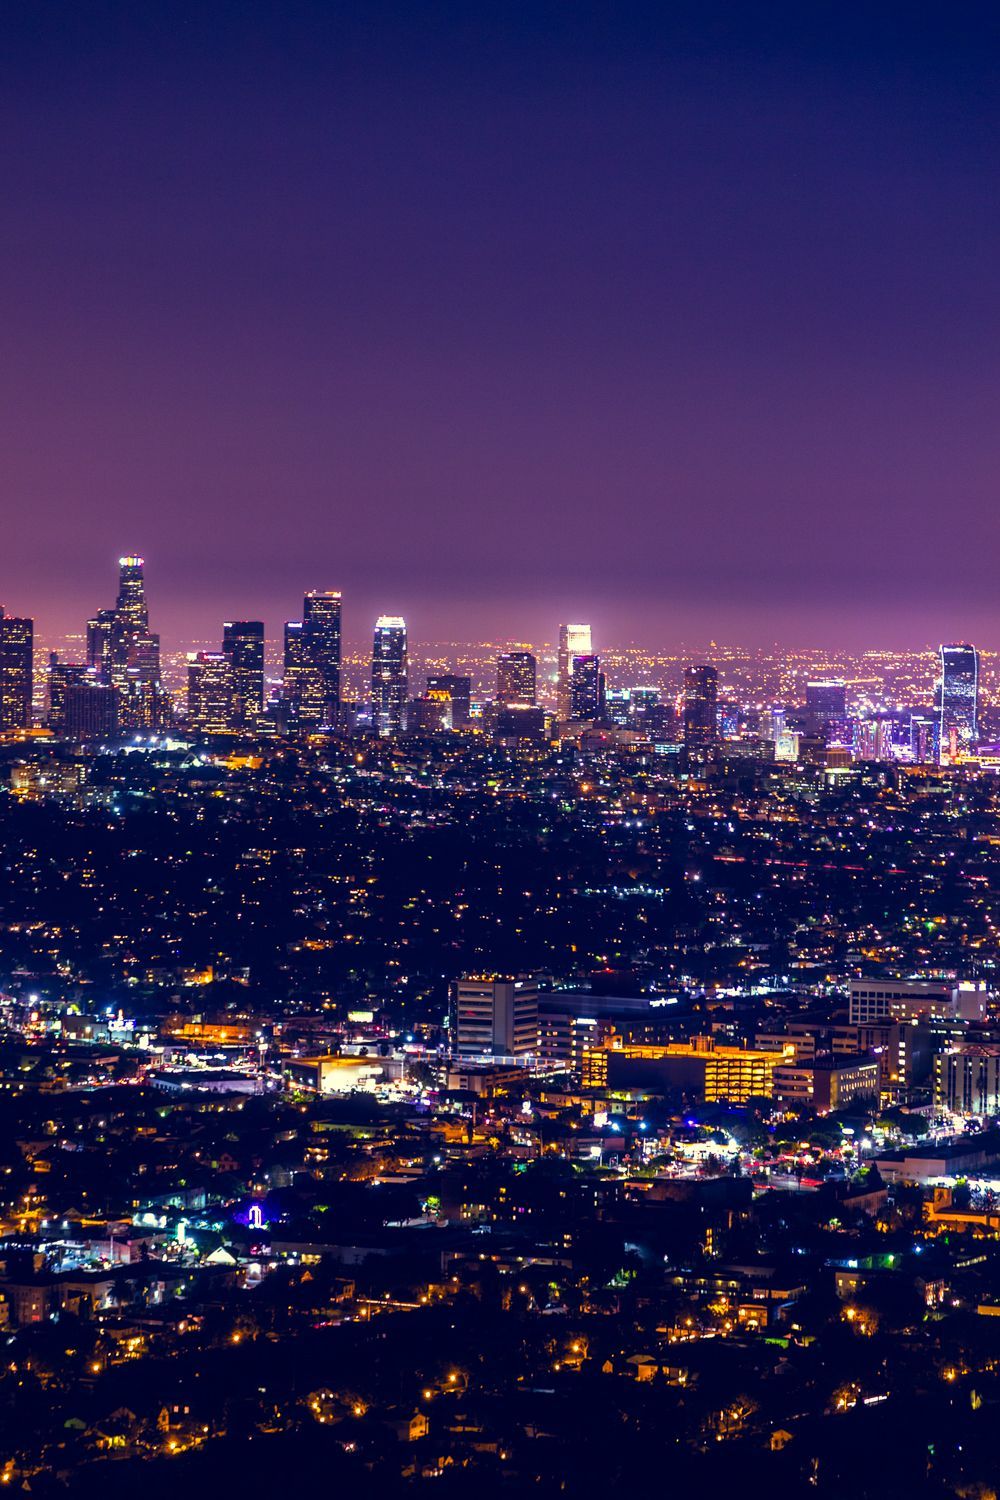 A cityscape at night with a purple sky - Los Angeles